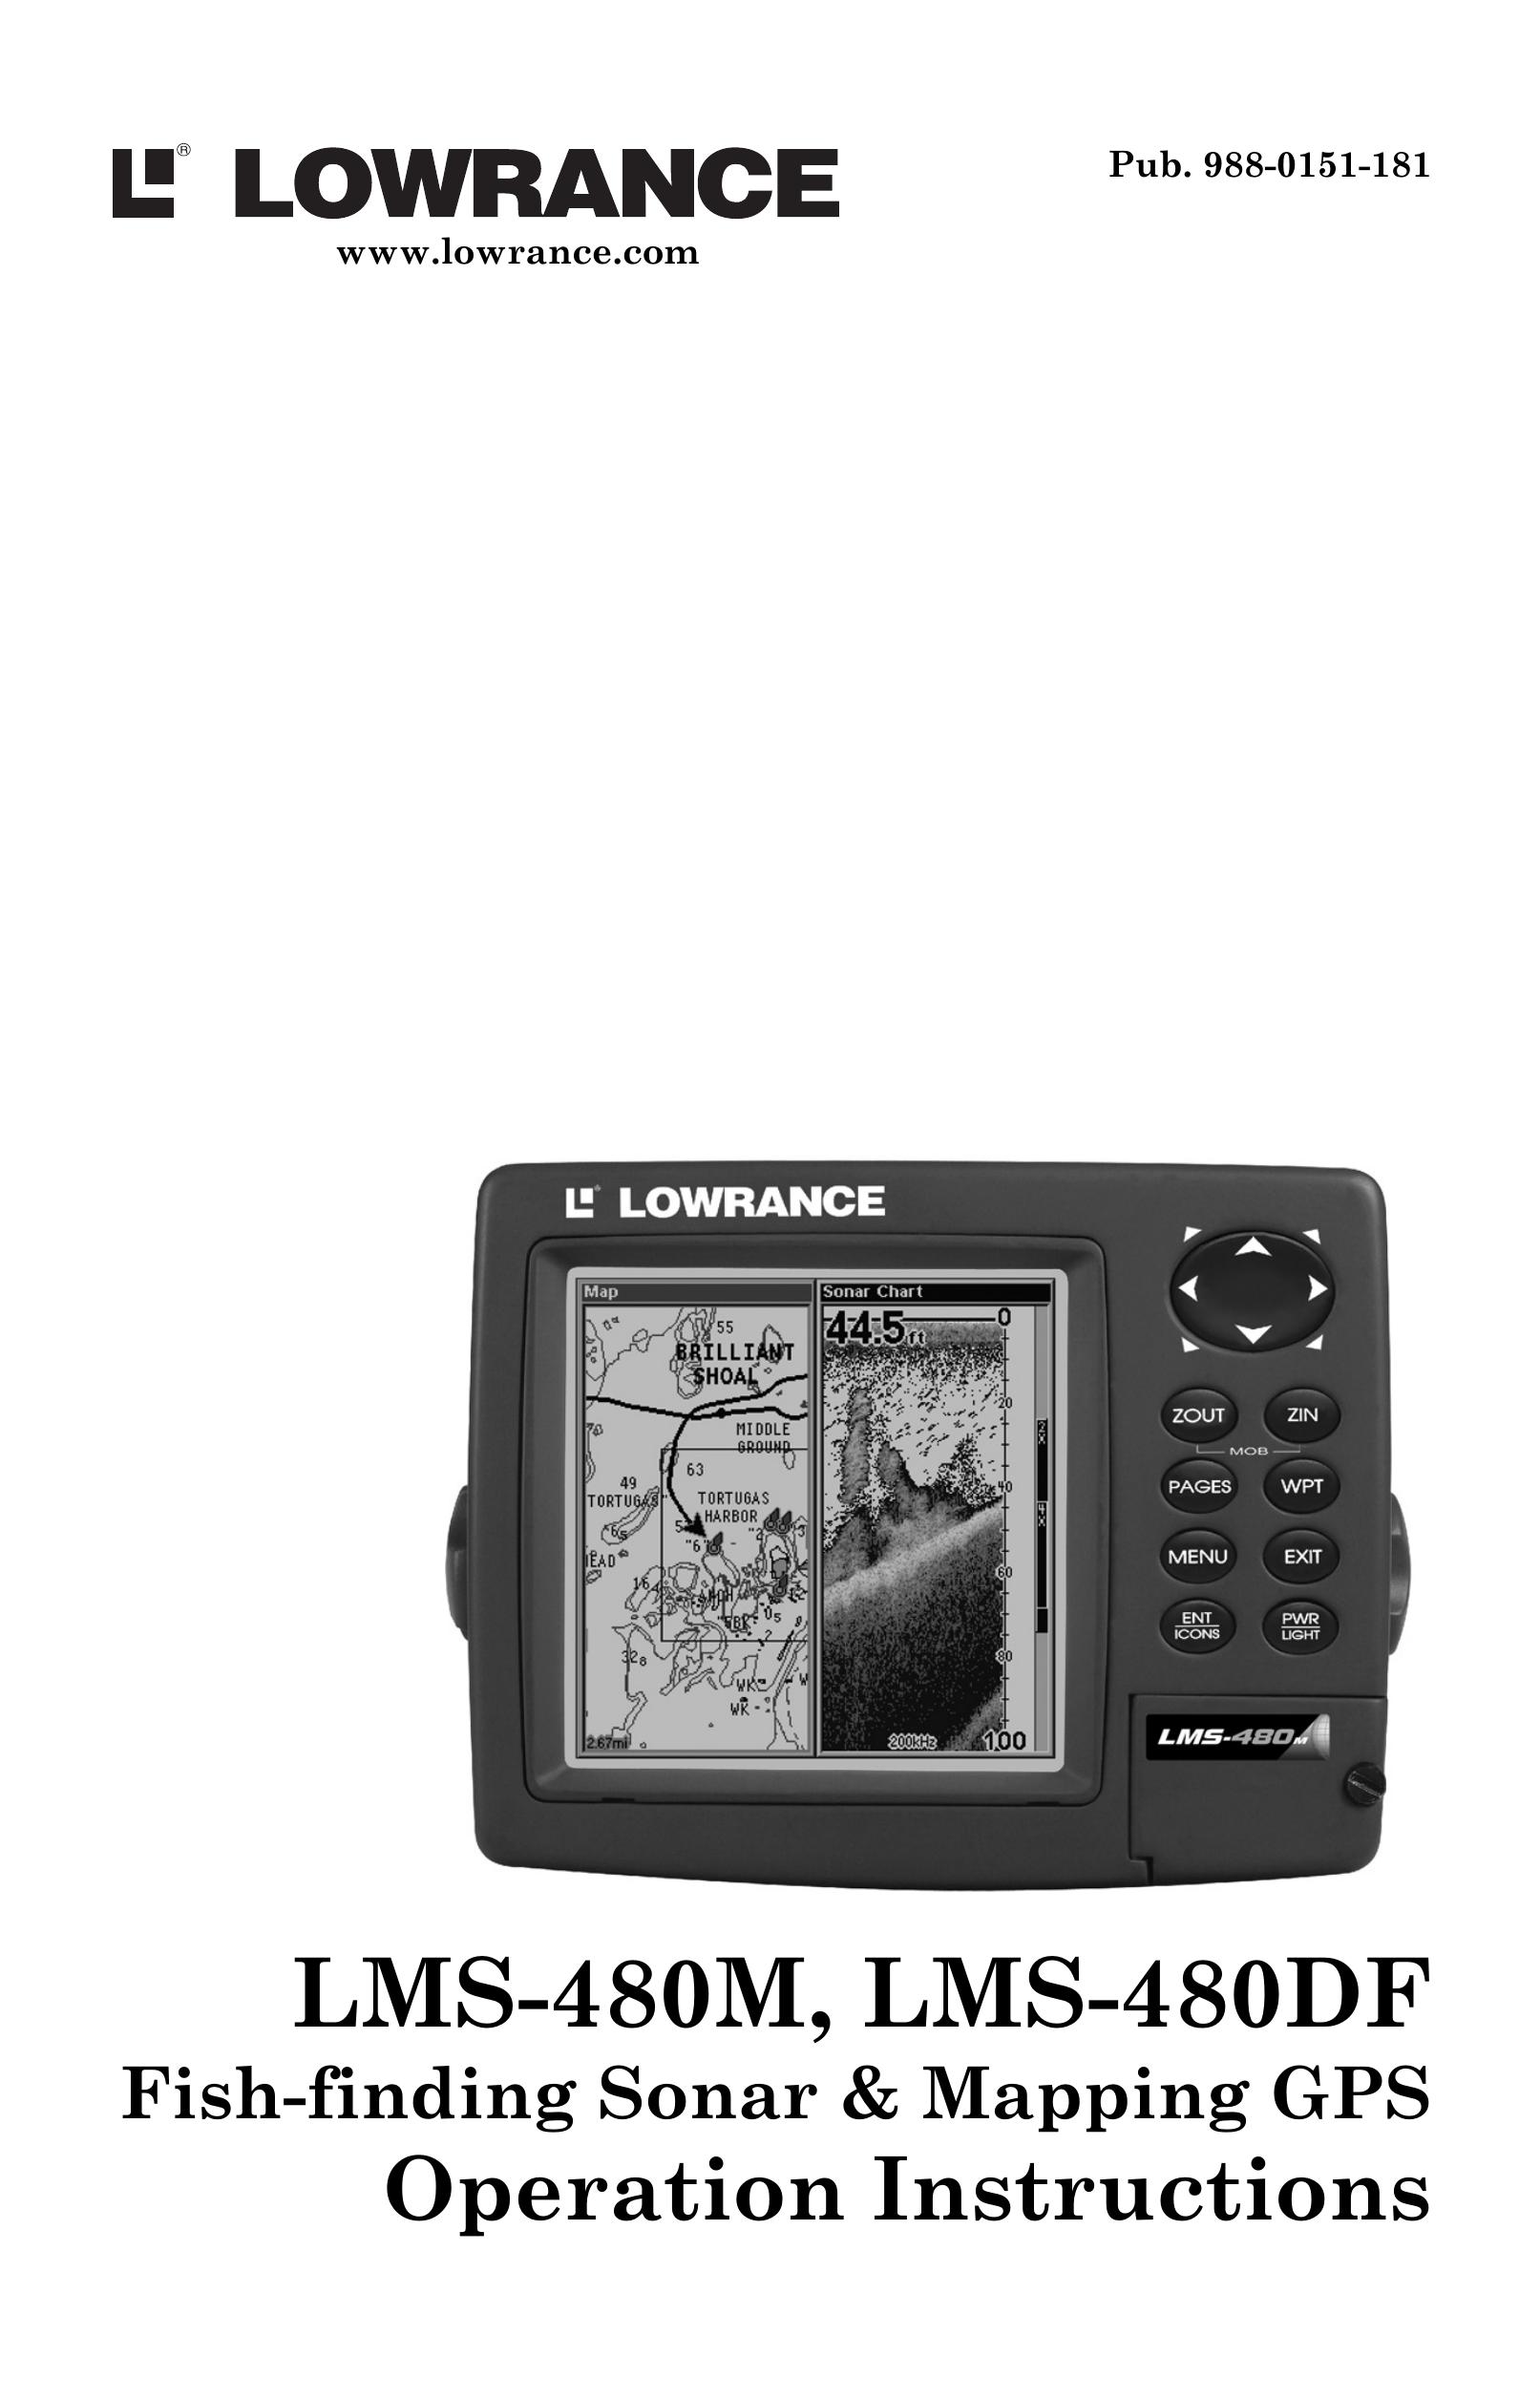 Lowrance electronic LMS-480DF Fish Finder User Manual